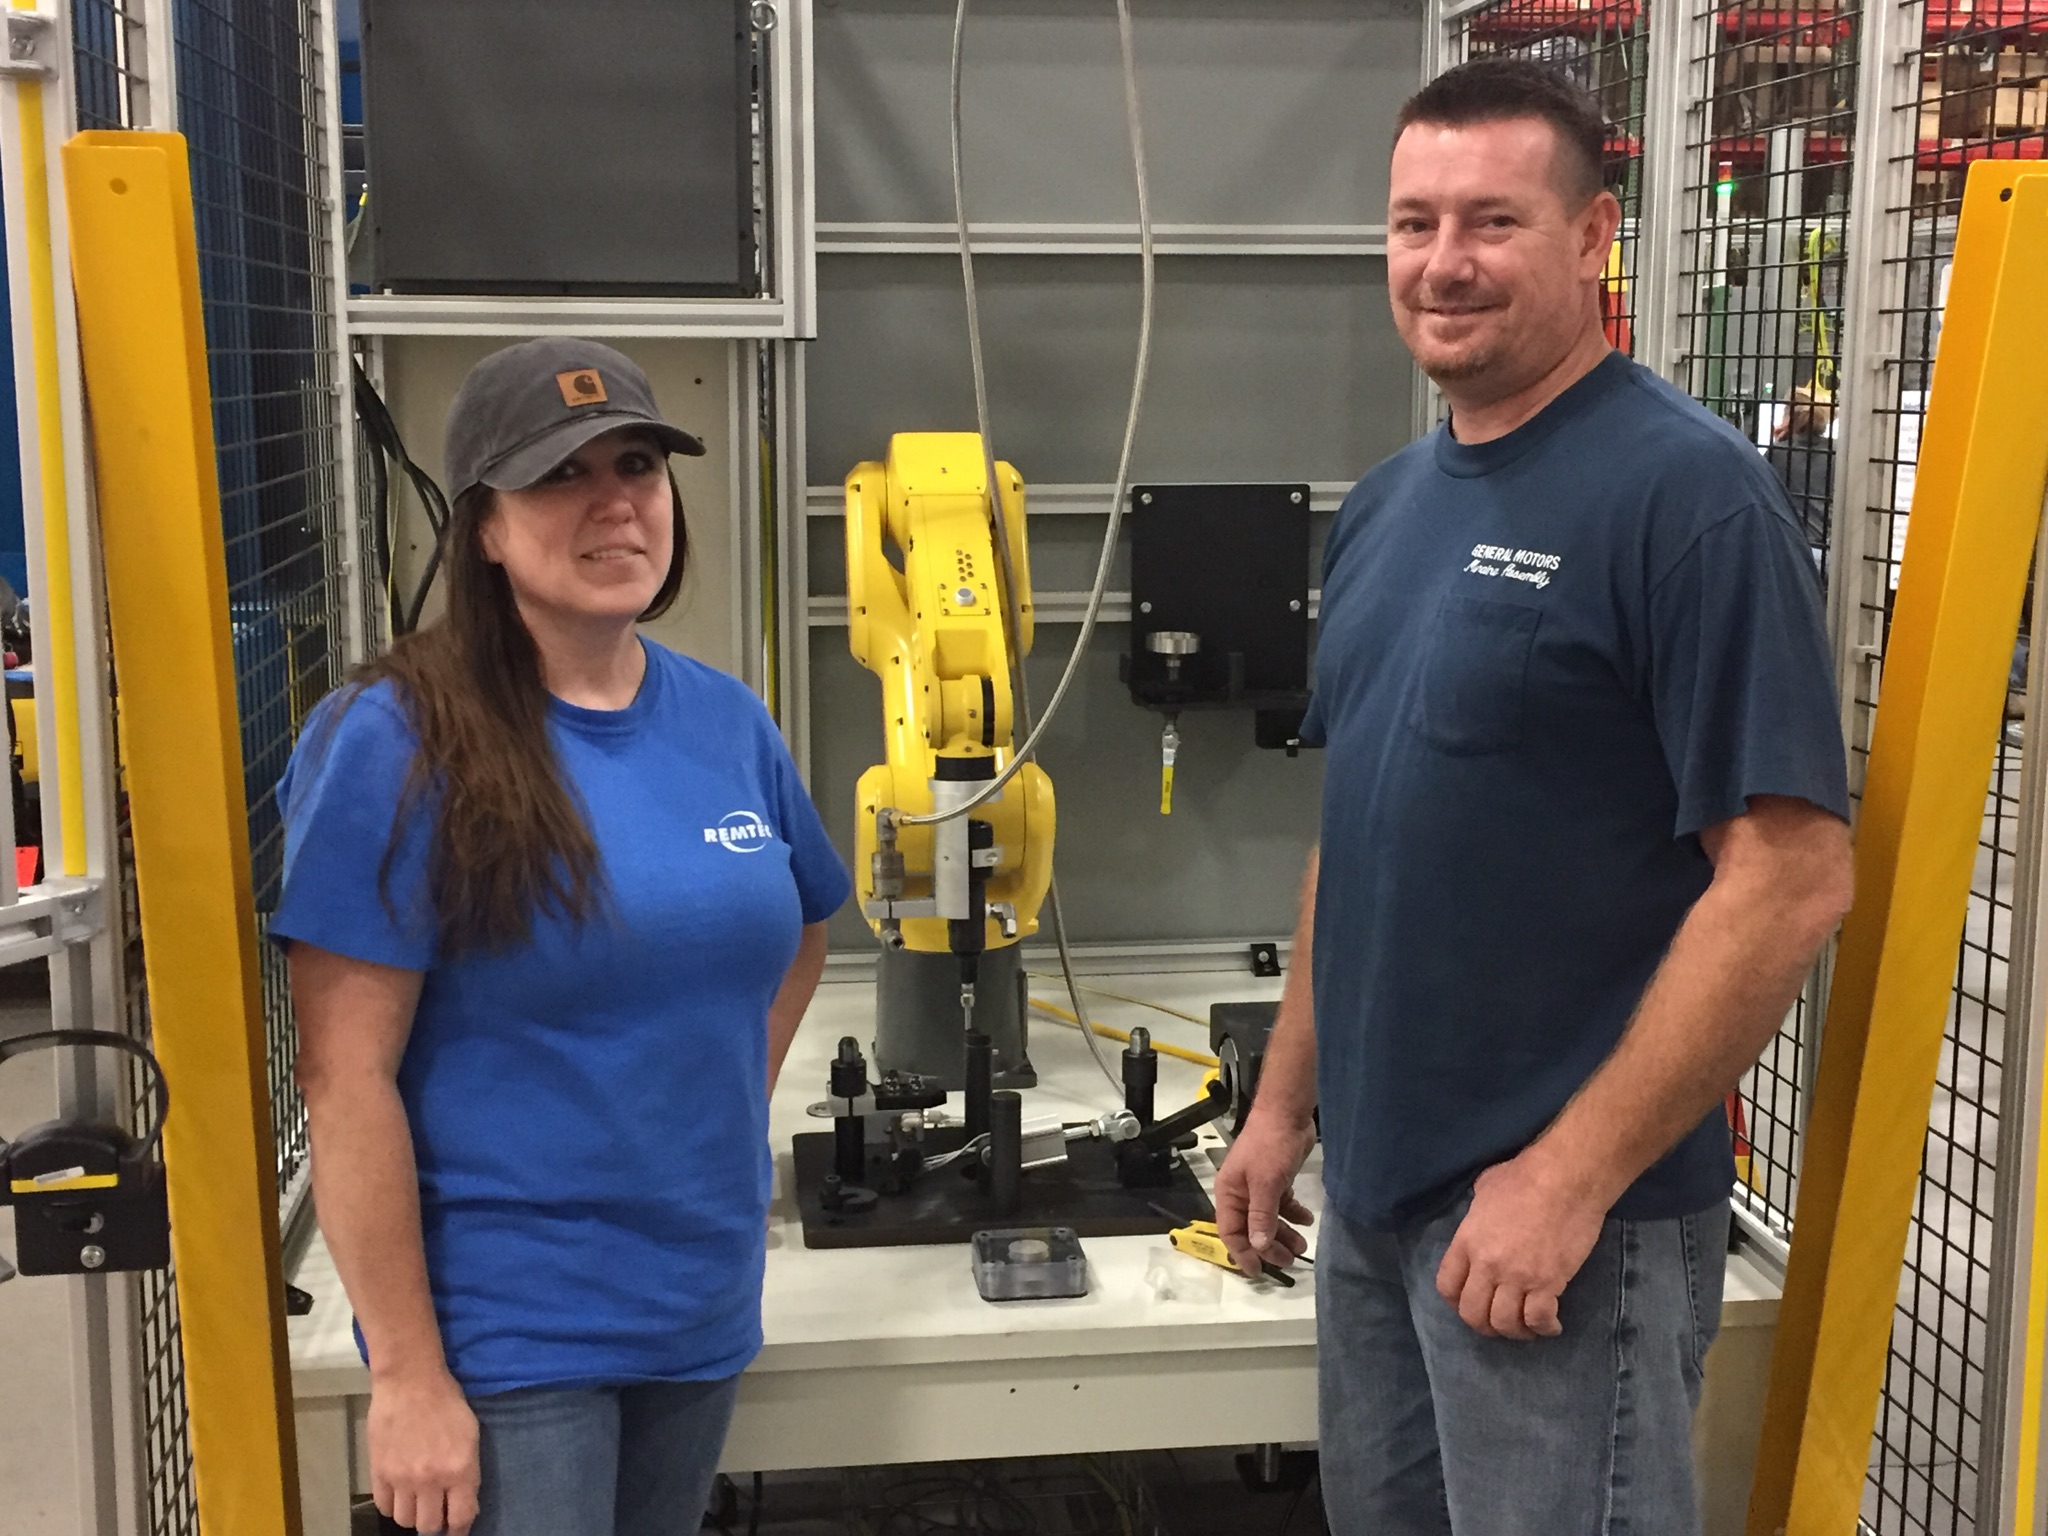 WCCC students hired by Remtec Automation - Amanda Seacrist and Michael (Jason) Bangert, not shown Will Cook.  Amanda, Will and Jason are all Electro-Mechanical Technicians.